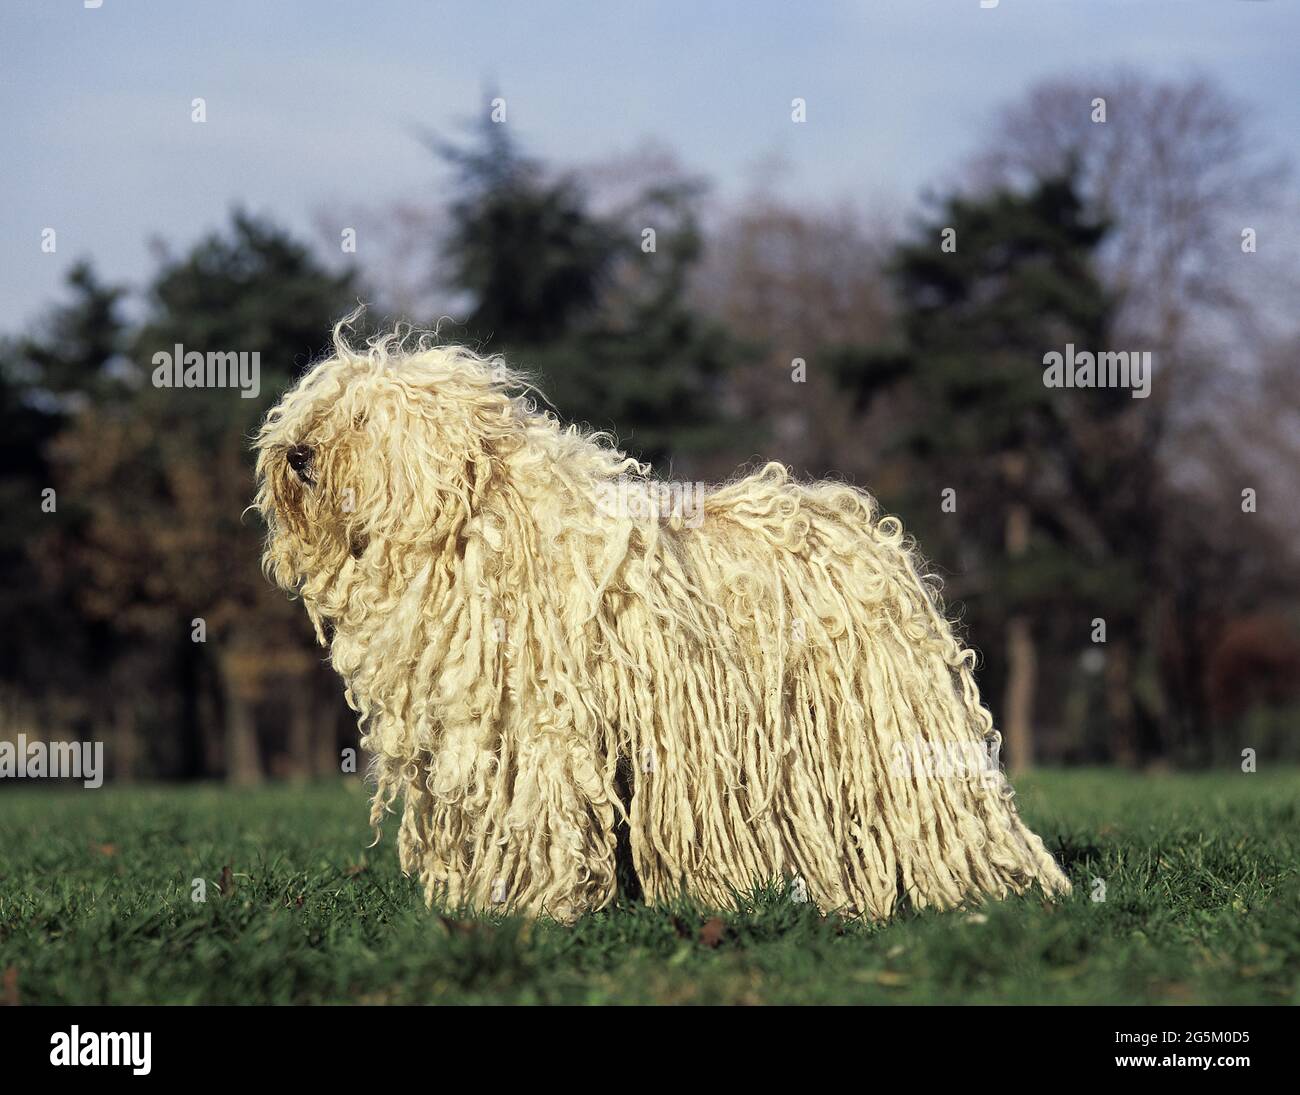 Hungarian Puli dog, adult standing on lawn Stock Photo